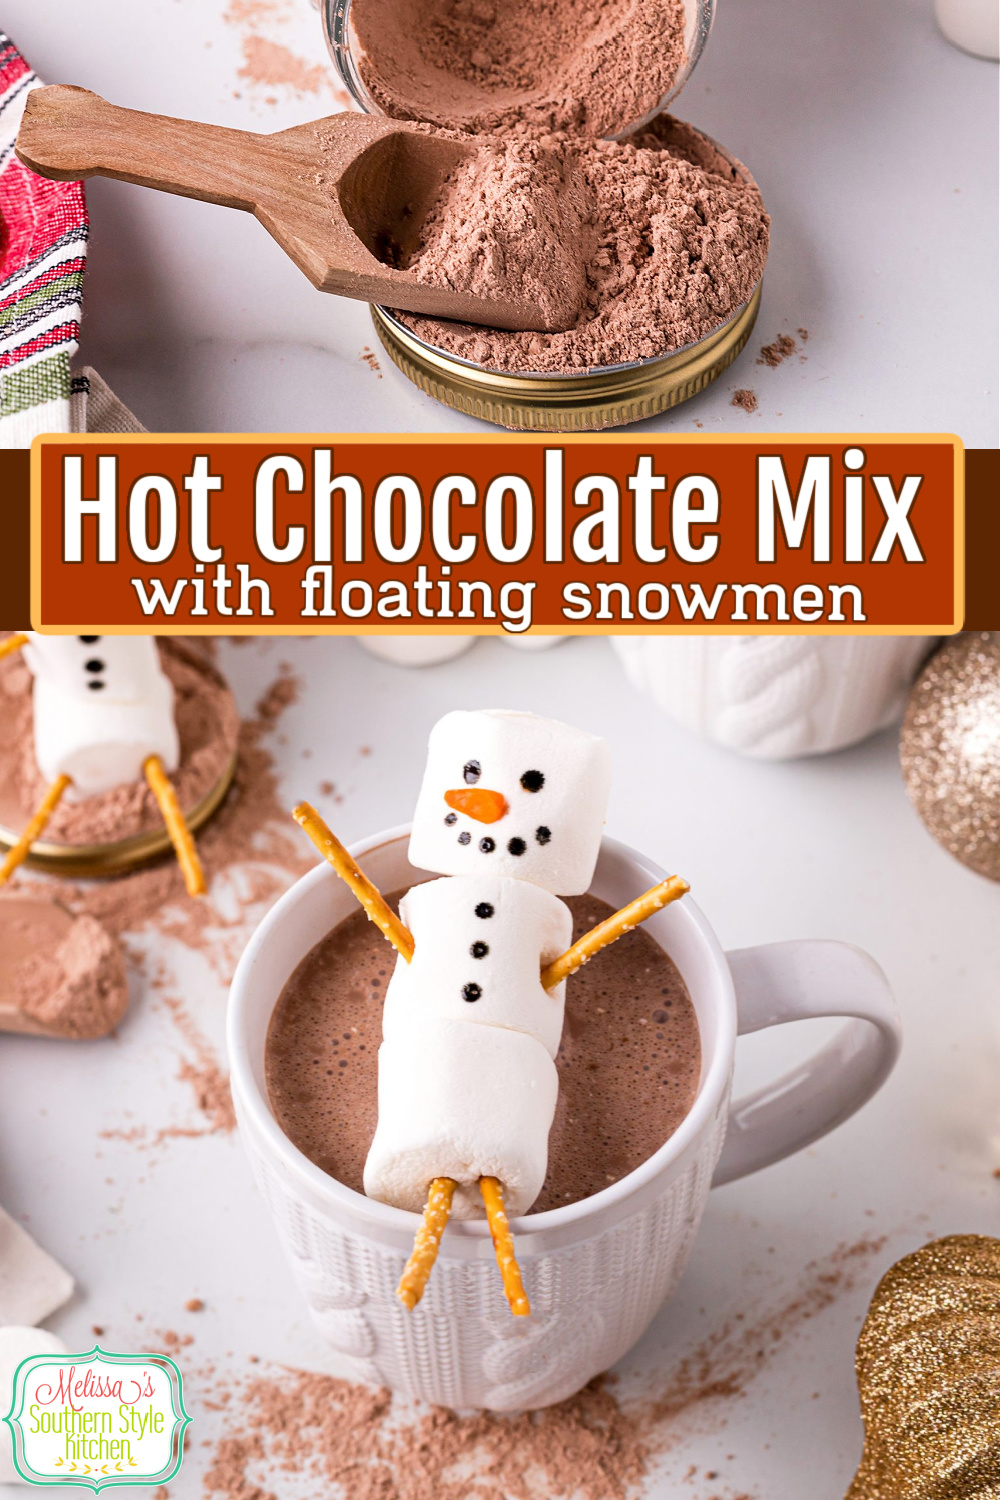 This oh-so-easy Hot Chocolate Mix topped with homemade floating snowmen is perfect for DIY family projects and homemade gift giving #hotchocolatemix #hotcocoa #hotchocolaterecipe #easyhotcocoa #hotchocolate #DIY #homemadegifts #chocolate via @melissasssk